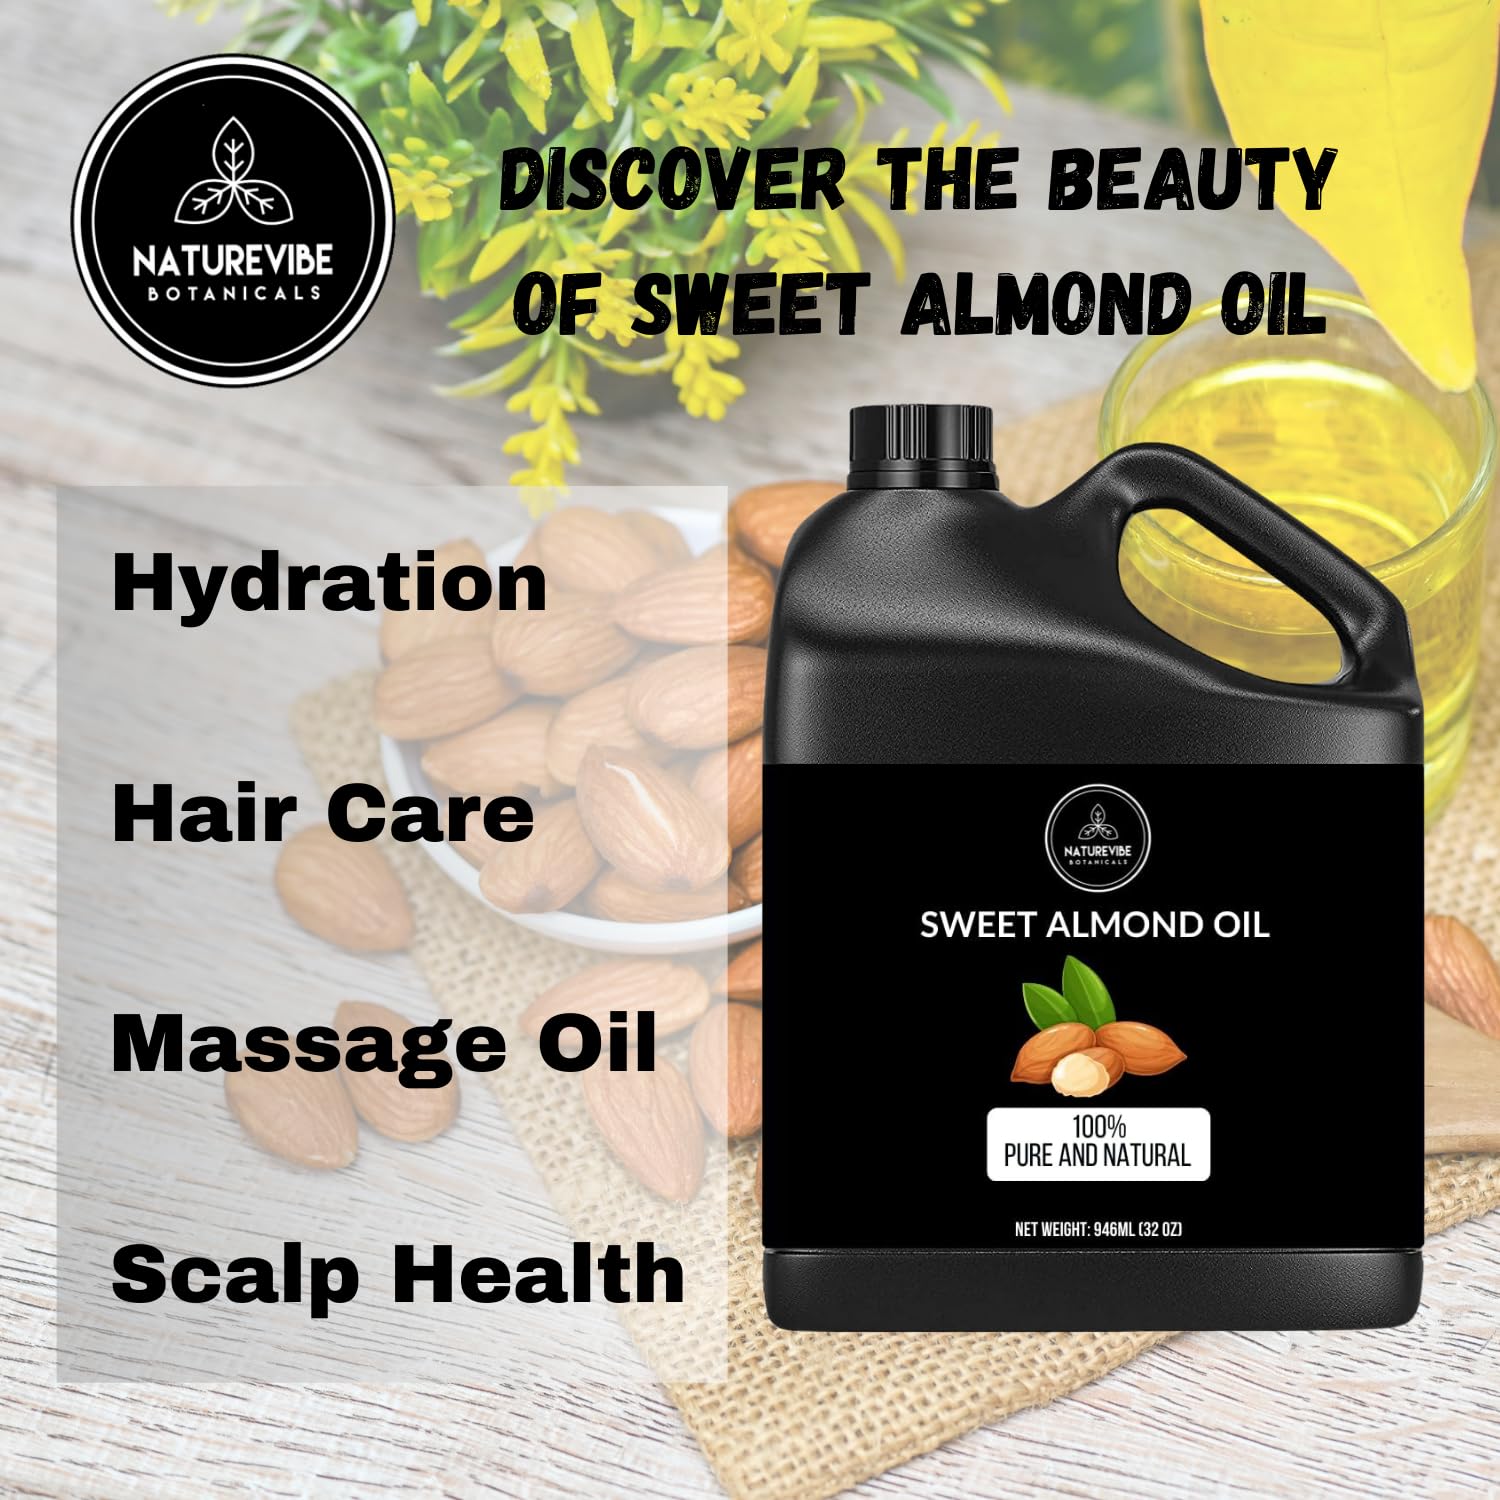 Sweet Almond Oil 32 Ounces by Naturevibe Botanicals | 100% Pure and Natural | Great for Skin and Hair | Body Oil | Cold-Pressed Almond Oil (946 ml) : Health & Household